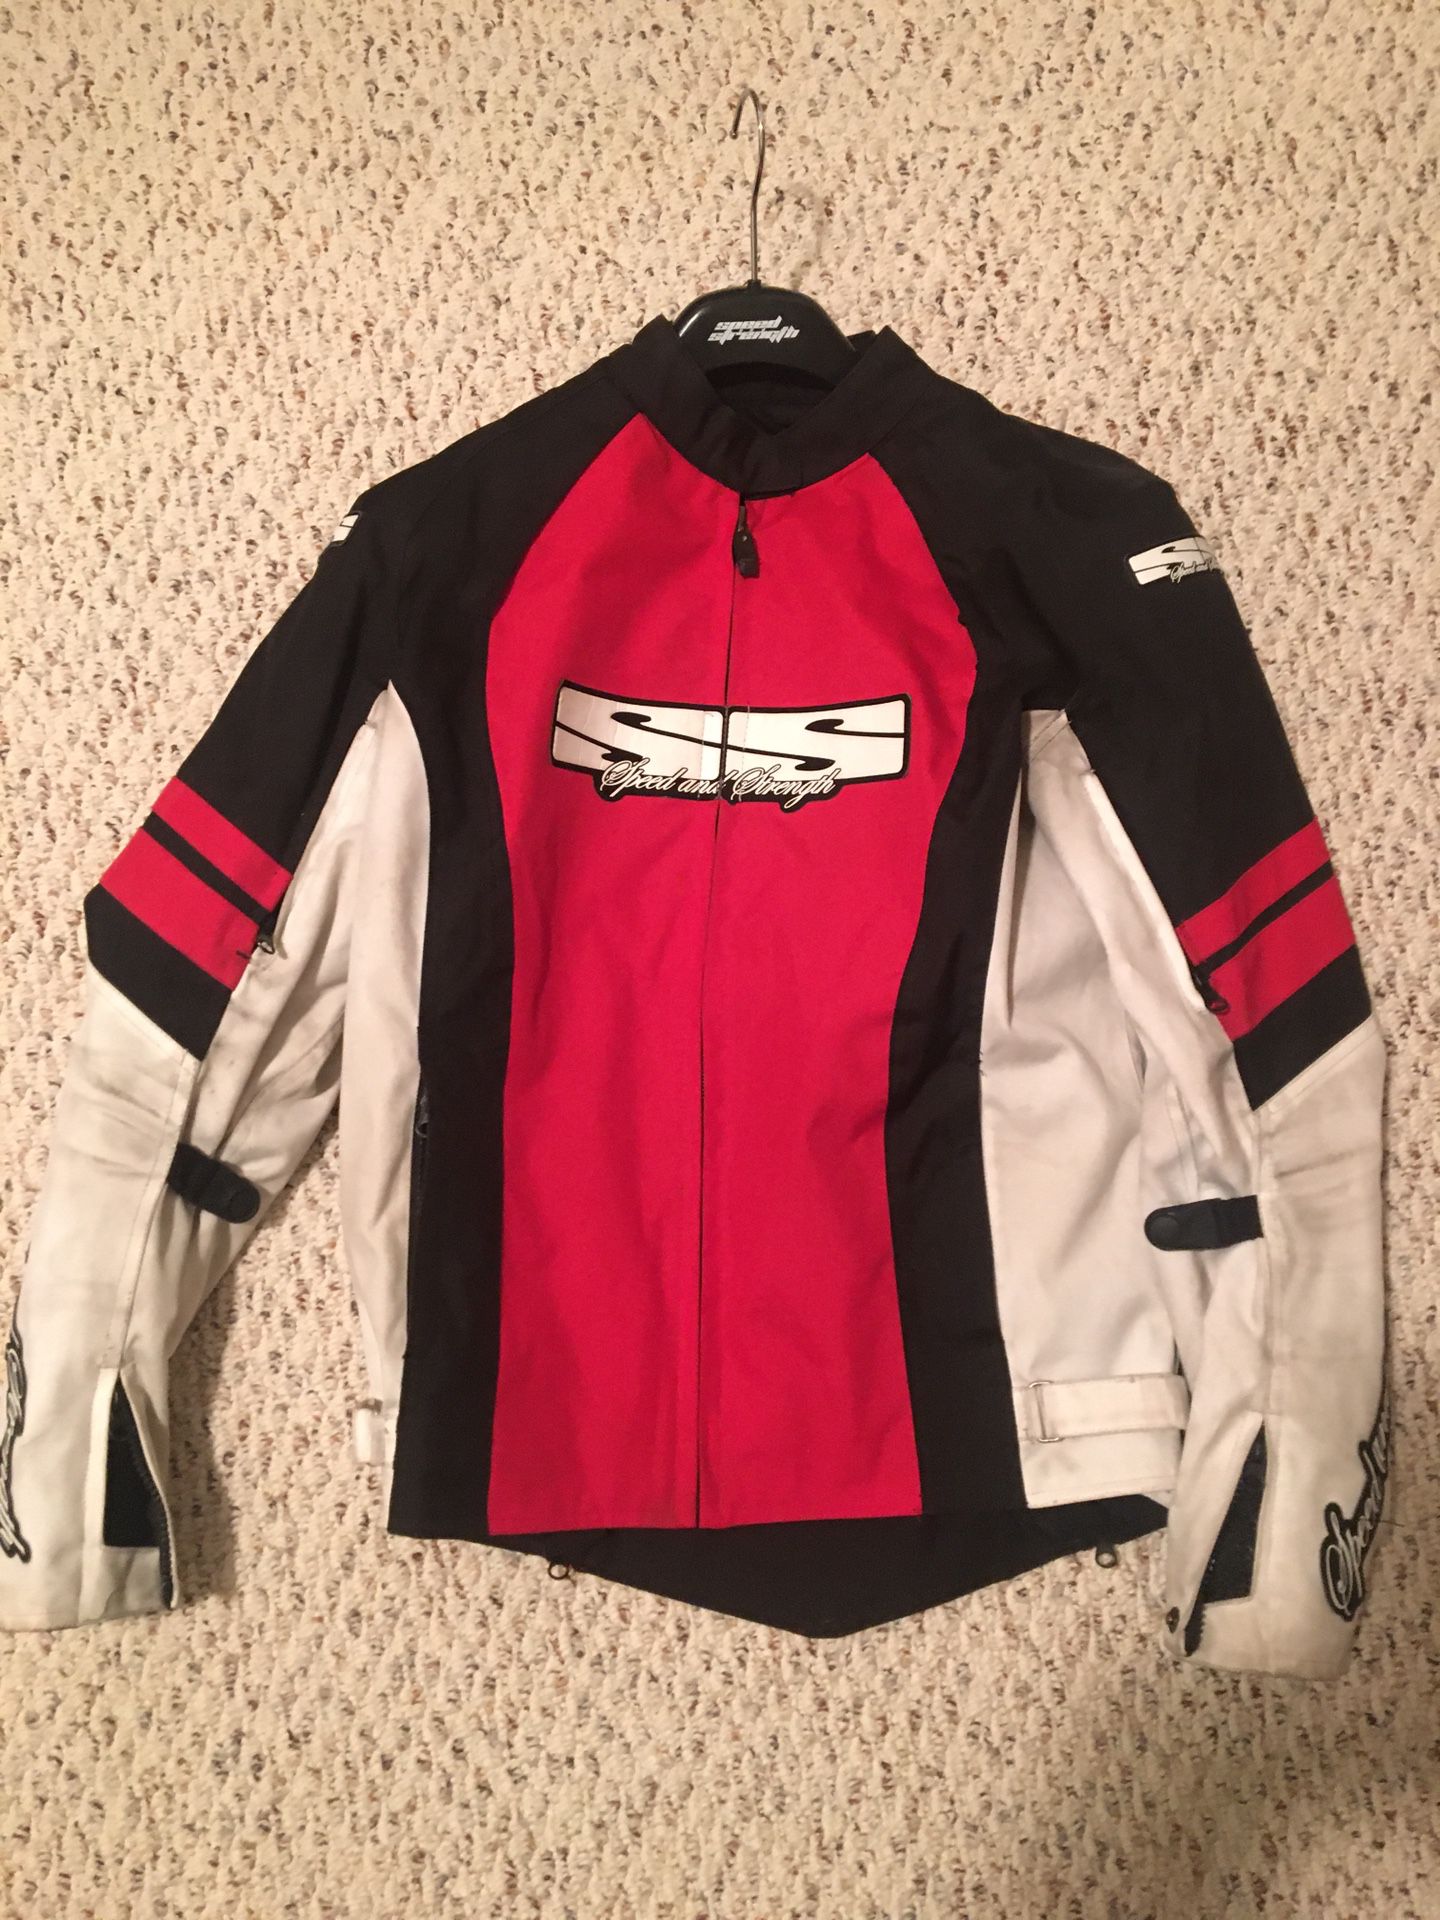 Speed & Strength Red Women’s Motorcycle Jacket